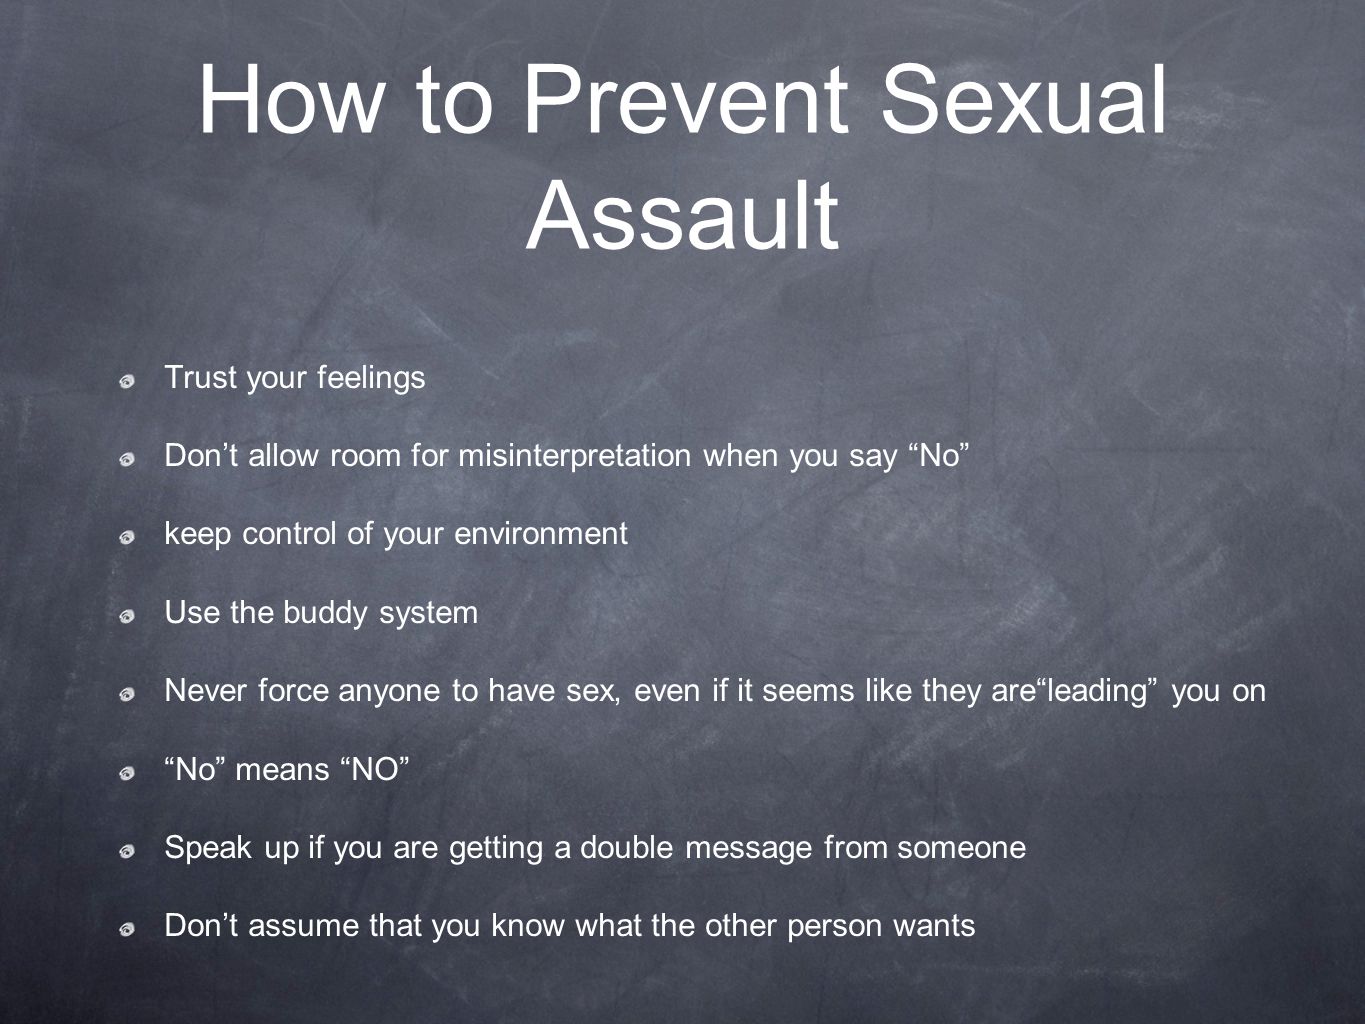 How to Prevent Sexual Assault Trust your feelings Don’t allow room for misinterpretation when you say No keep control of your environment Use the buddy system Never force anyone to have sex, even if it seems like they are leading you on No means NO Speak up if you are getting a double message from someone Don’t assume that you know what the other person wants